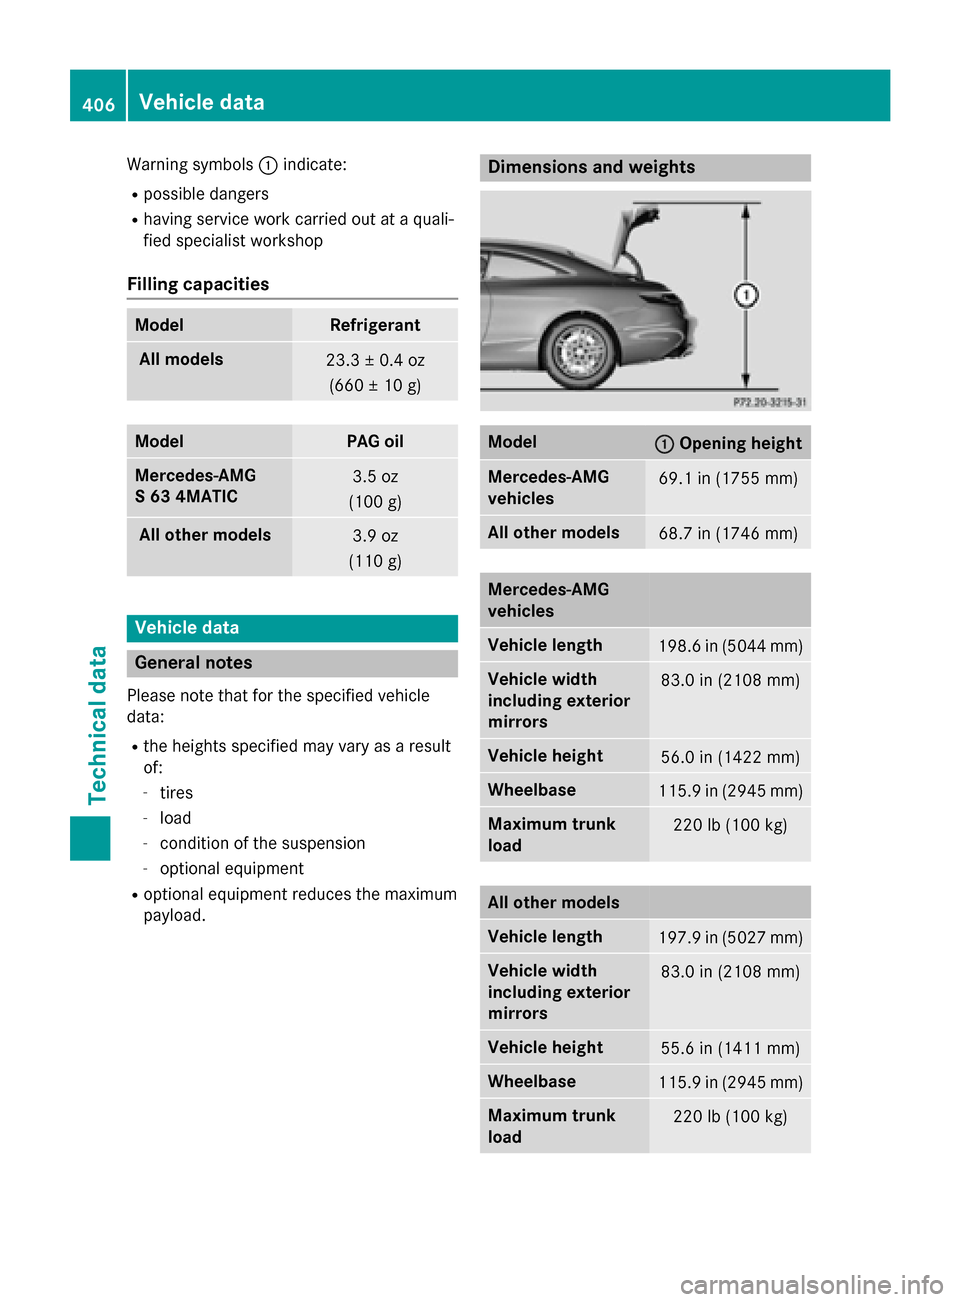 MERCEDES-BENZ S-Class COUPE 2016 C217 Owners Manual Warning symbols:indicate:
Rpossible dangers
Rhaving service work carried out at a quali-
fied specialist workshop
Filling capacities
ModelRefrigerant
All models23.3 ± 0.4 oz
(660 ± 10 g)
ModelPAG oi